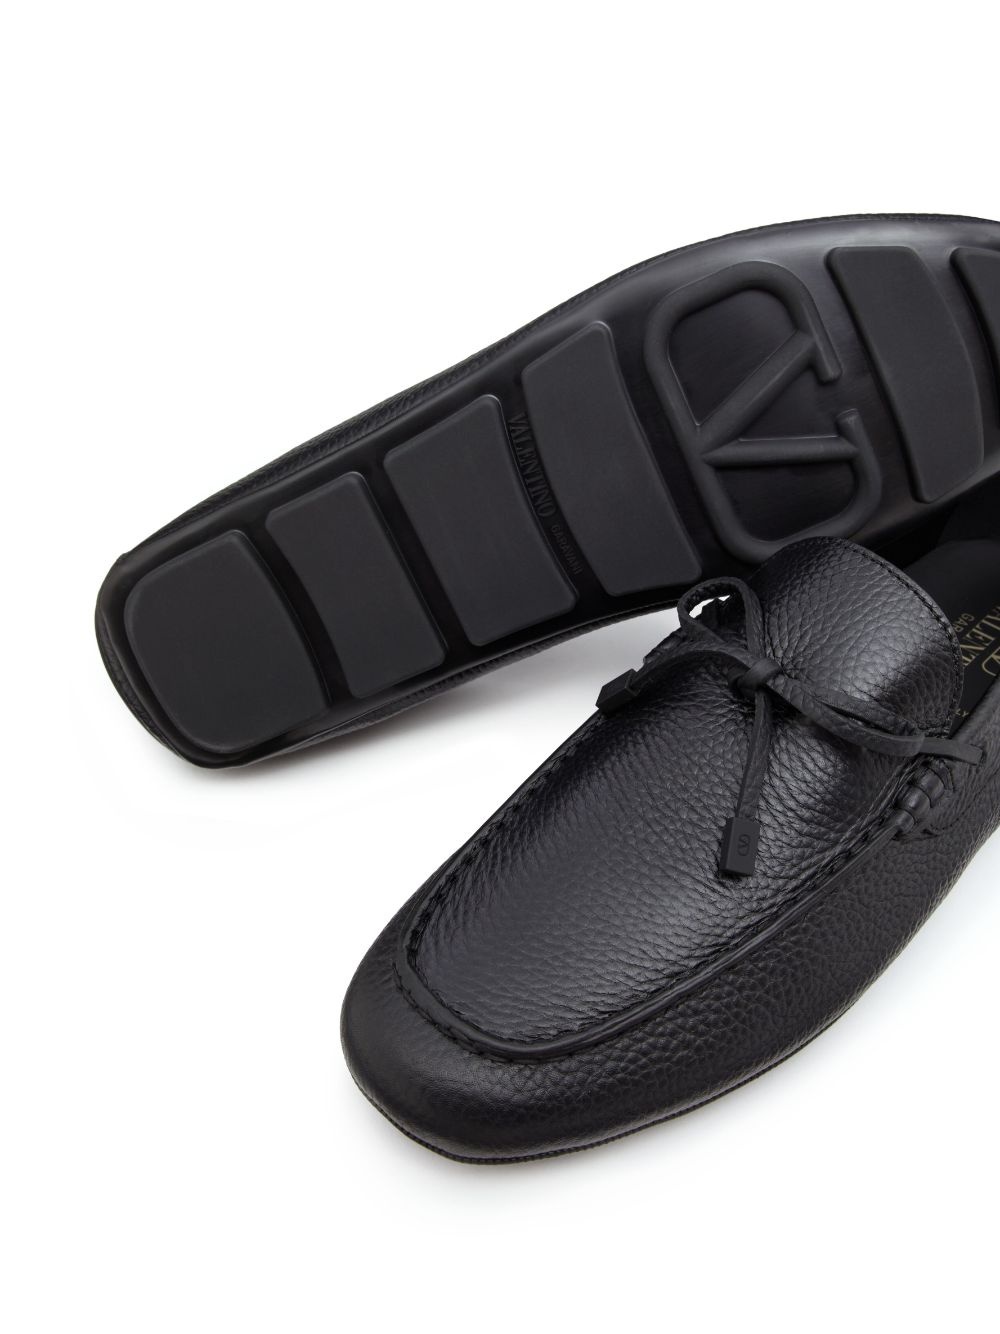 VLogo Signature leather driving shoes - 5